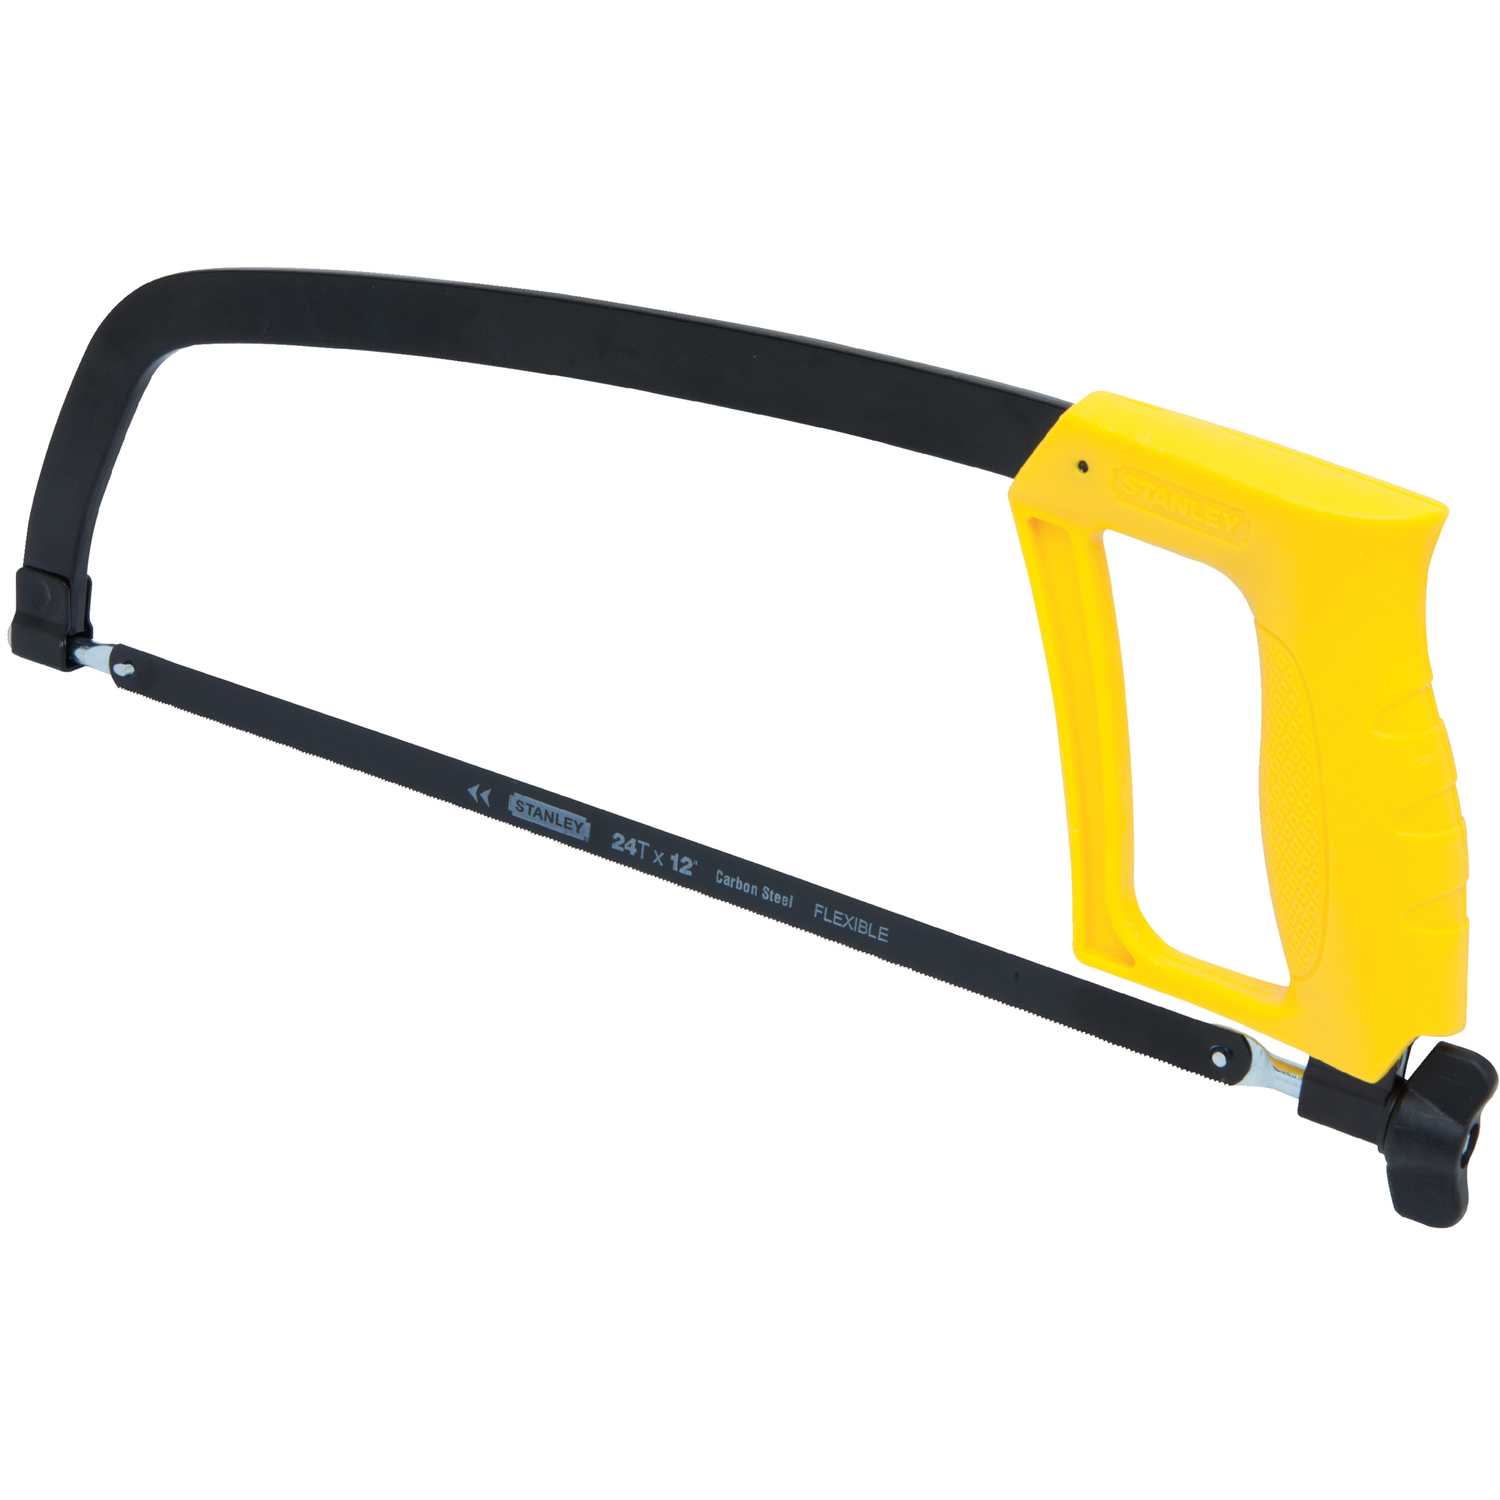 Stanley 12 in. Carbon Steel Hacksaw Black/Yellow 1 pc